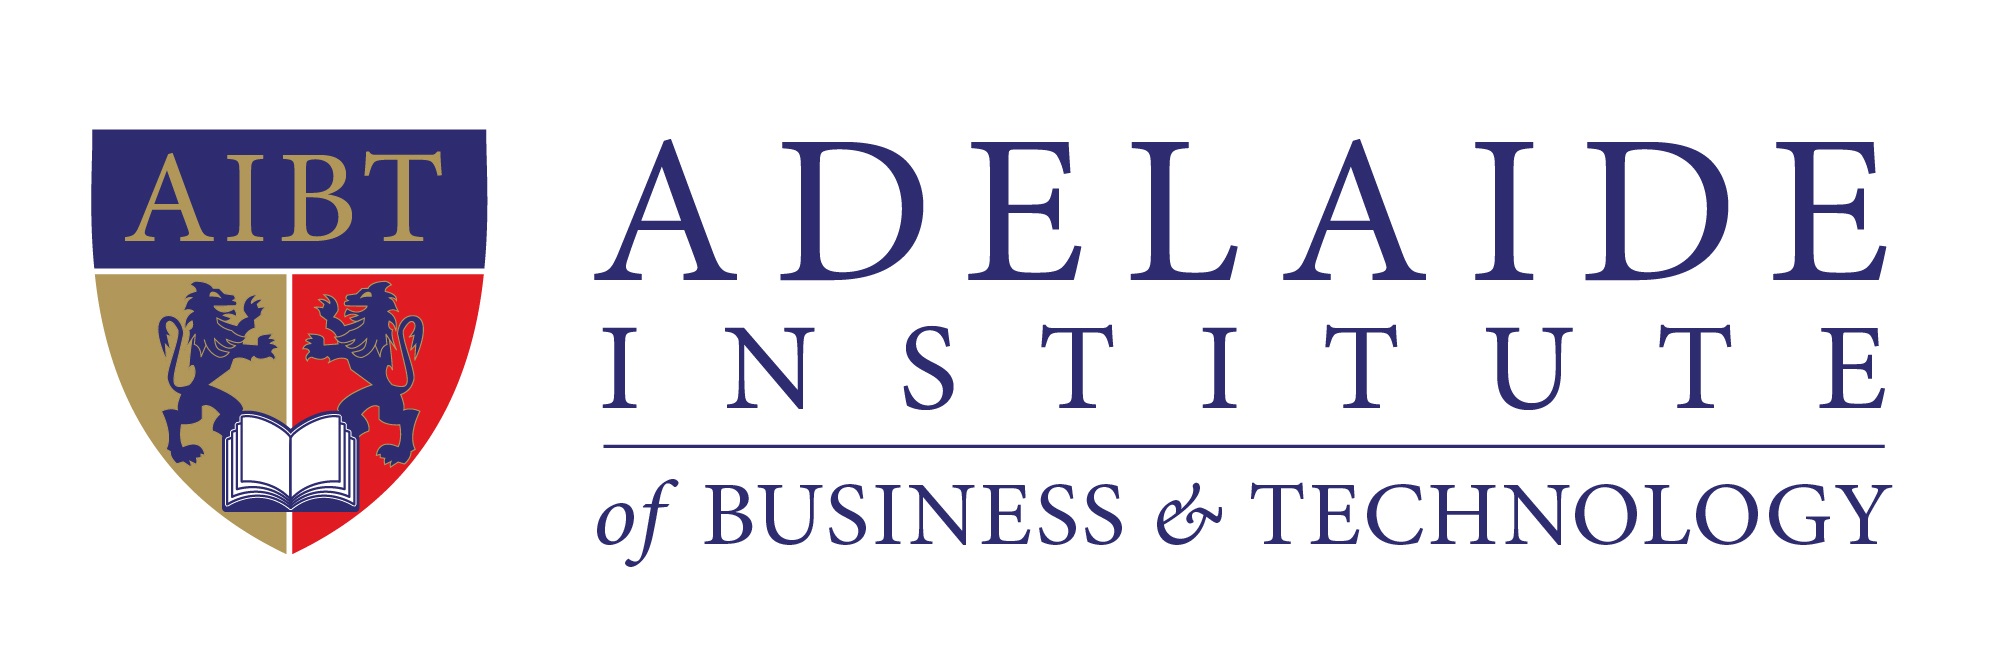 Adelaide Institute of Business & Technology